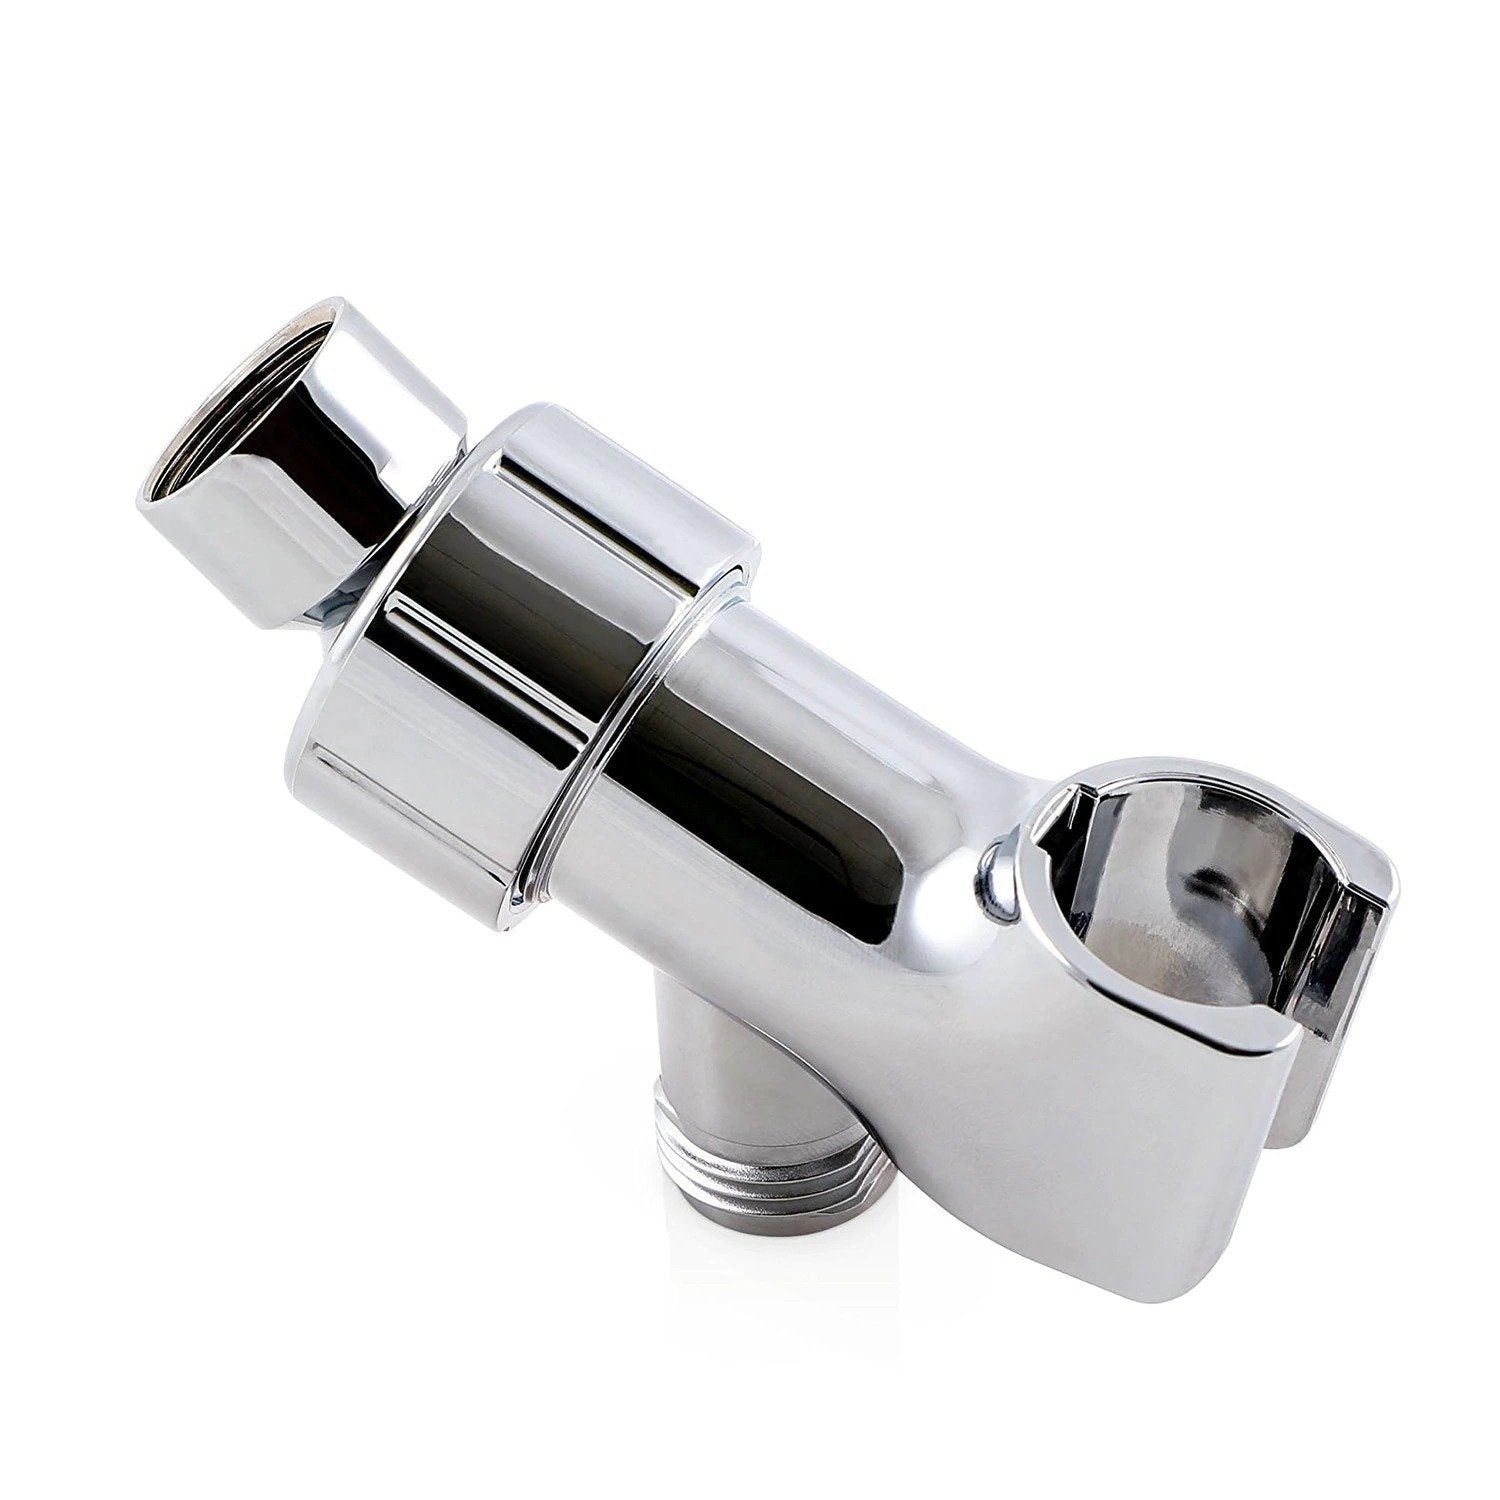 ShowerMaxx | Shower Head Holder in Polished Chrome Finish | Mount for Handheld Showerheads | Arm Bracket with Swivel Ball Connector | Adjustable